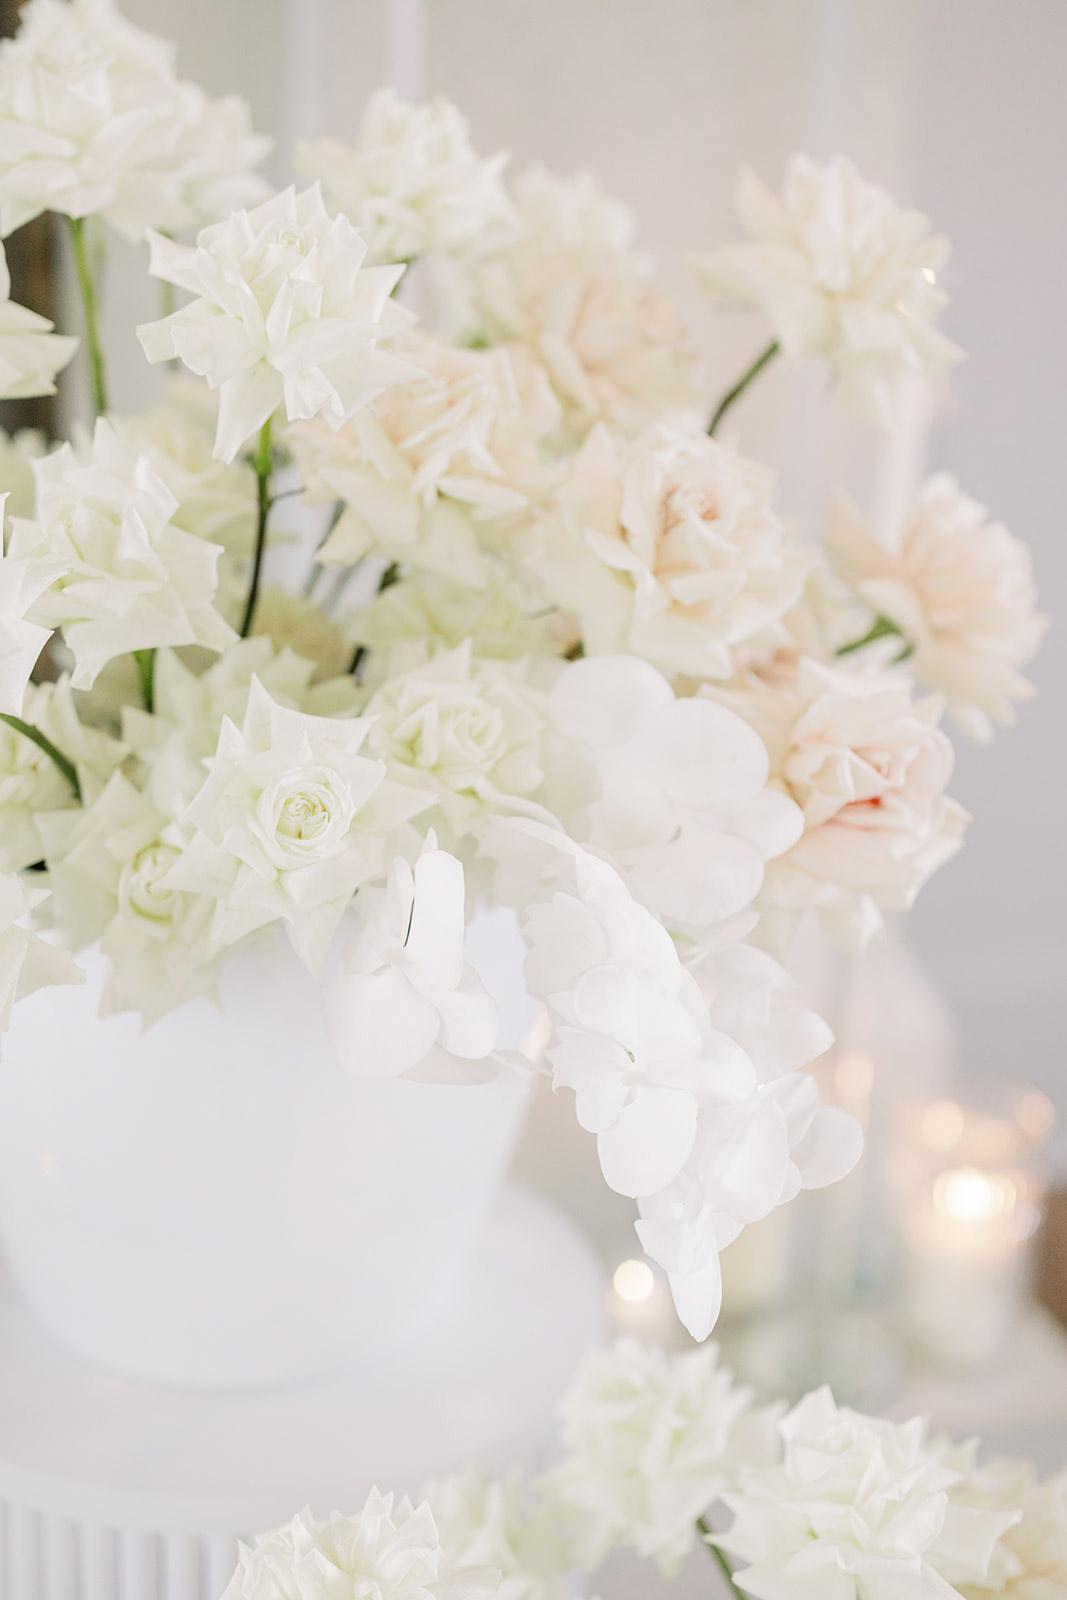 Close up photos of floral arrangement for Elora Mill Wedding Editorial featured in Wedding Chicks